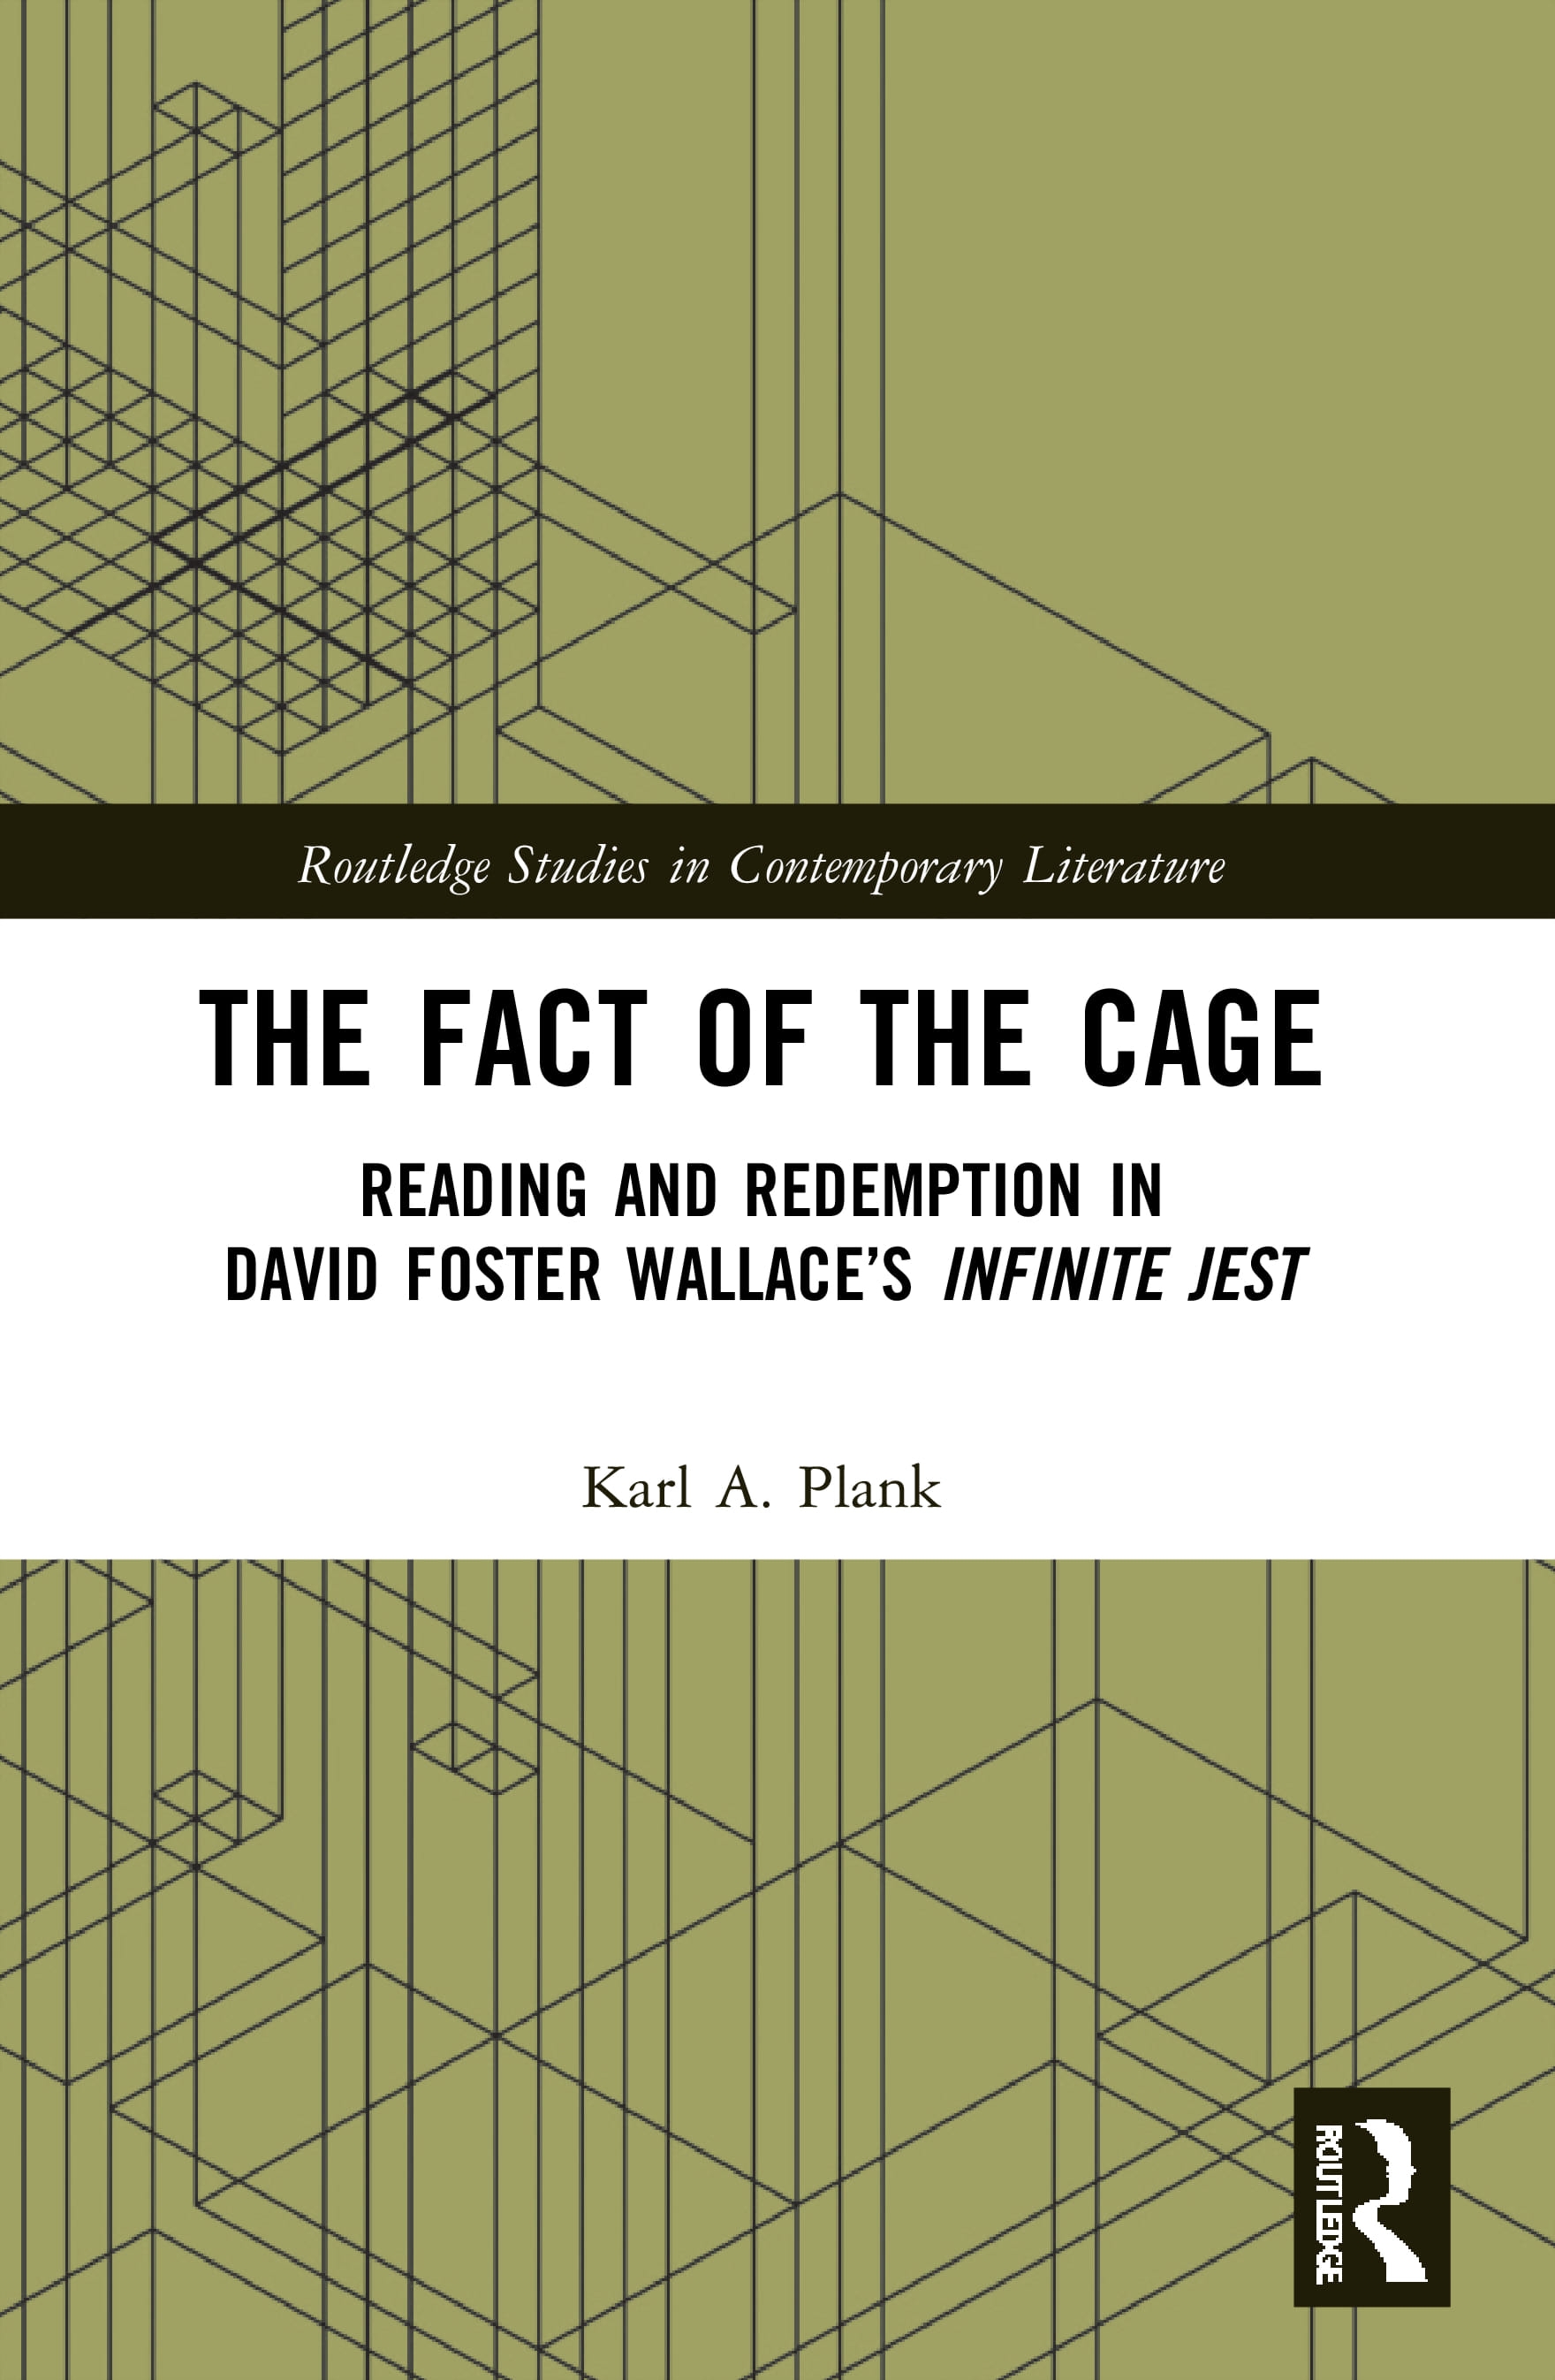 The Fact of the Cage: Reading and Redemption in David Foster Wallace’s Infinite Jest